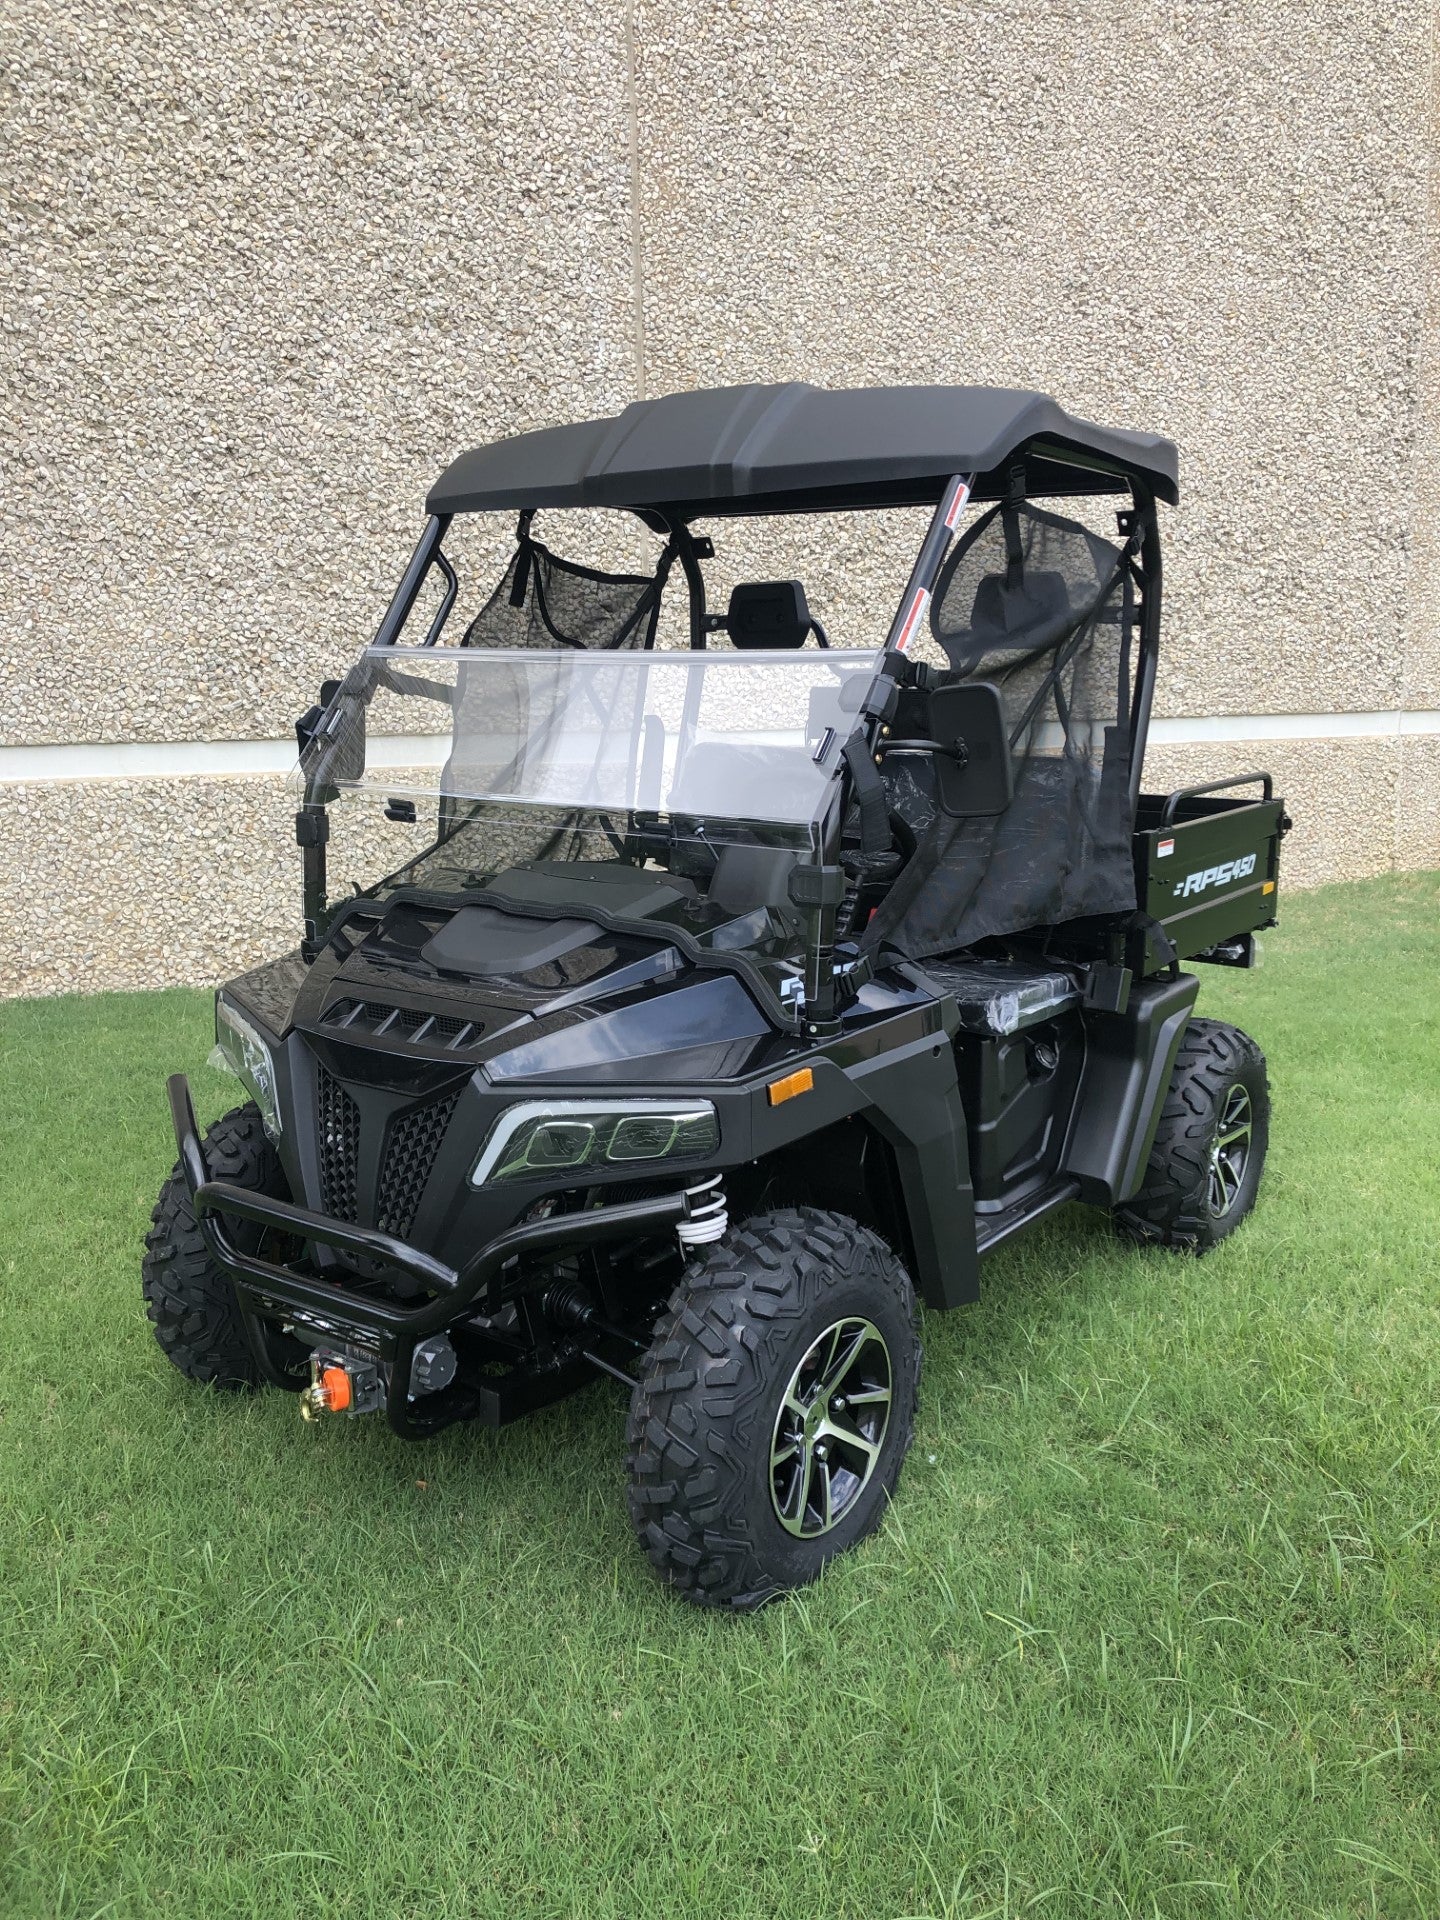 RPS UTV 450 EFI, Four Wheel Drive, Rack and Pinion Steering, Custom Alloy Rims, Winch, Dump Bed, Full light package, SHIPS FULLY ASSEMBLED via Car Carrier to your Home! - Motobuys